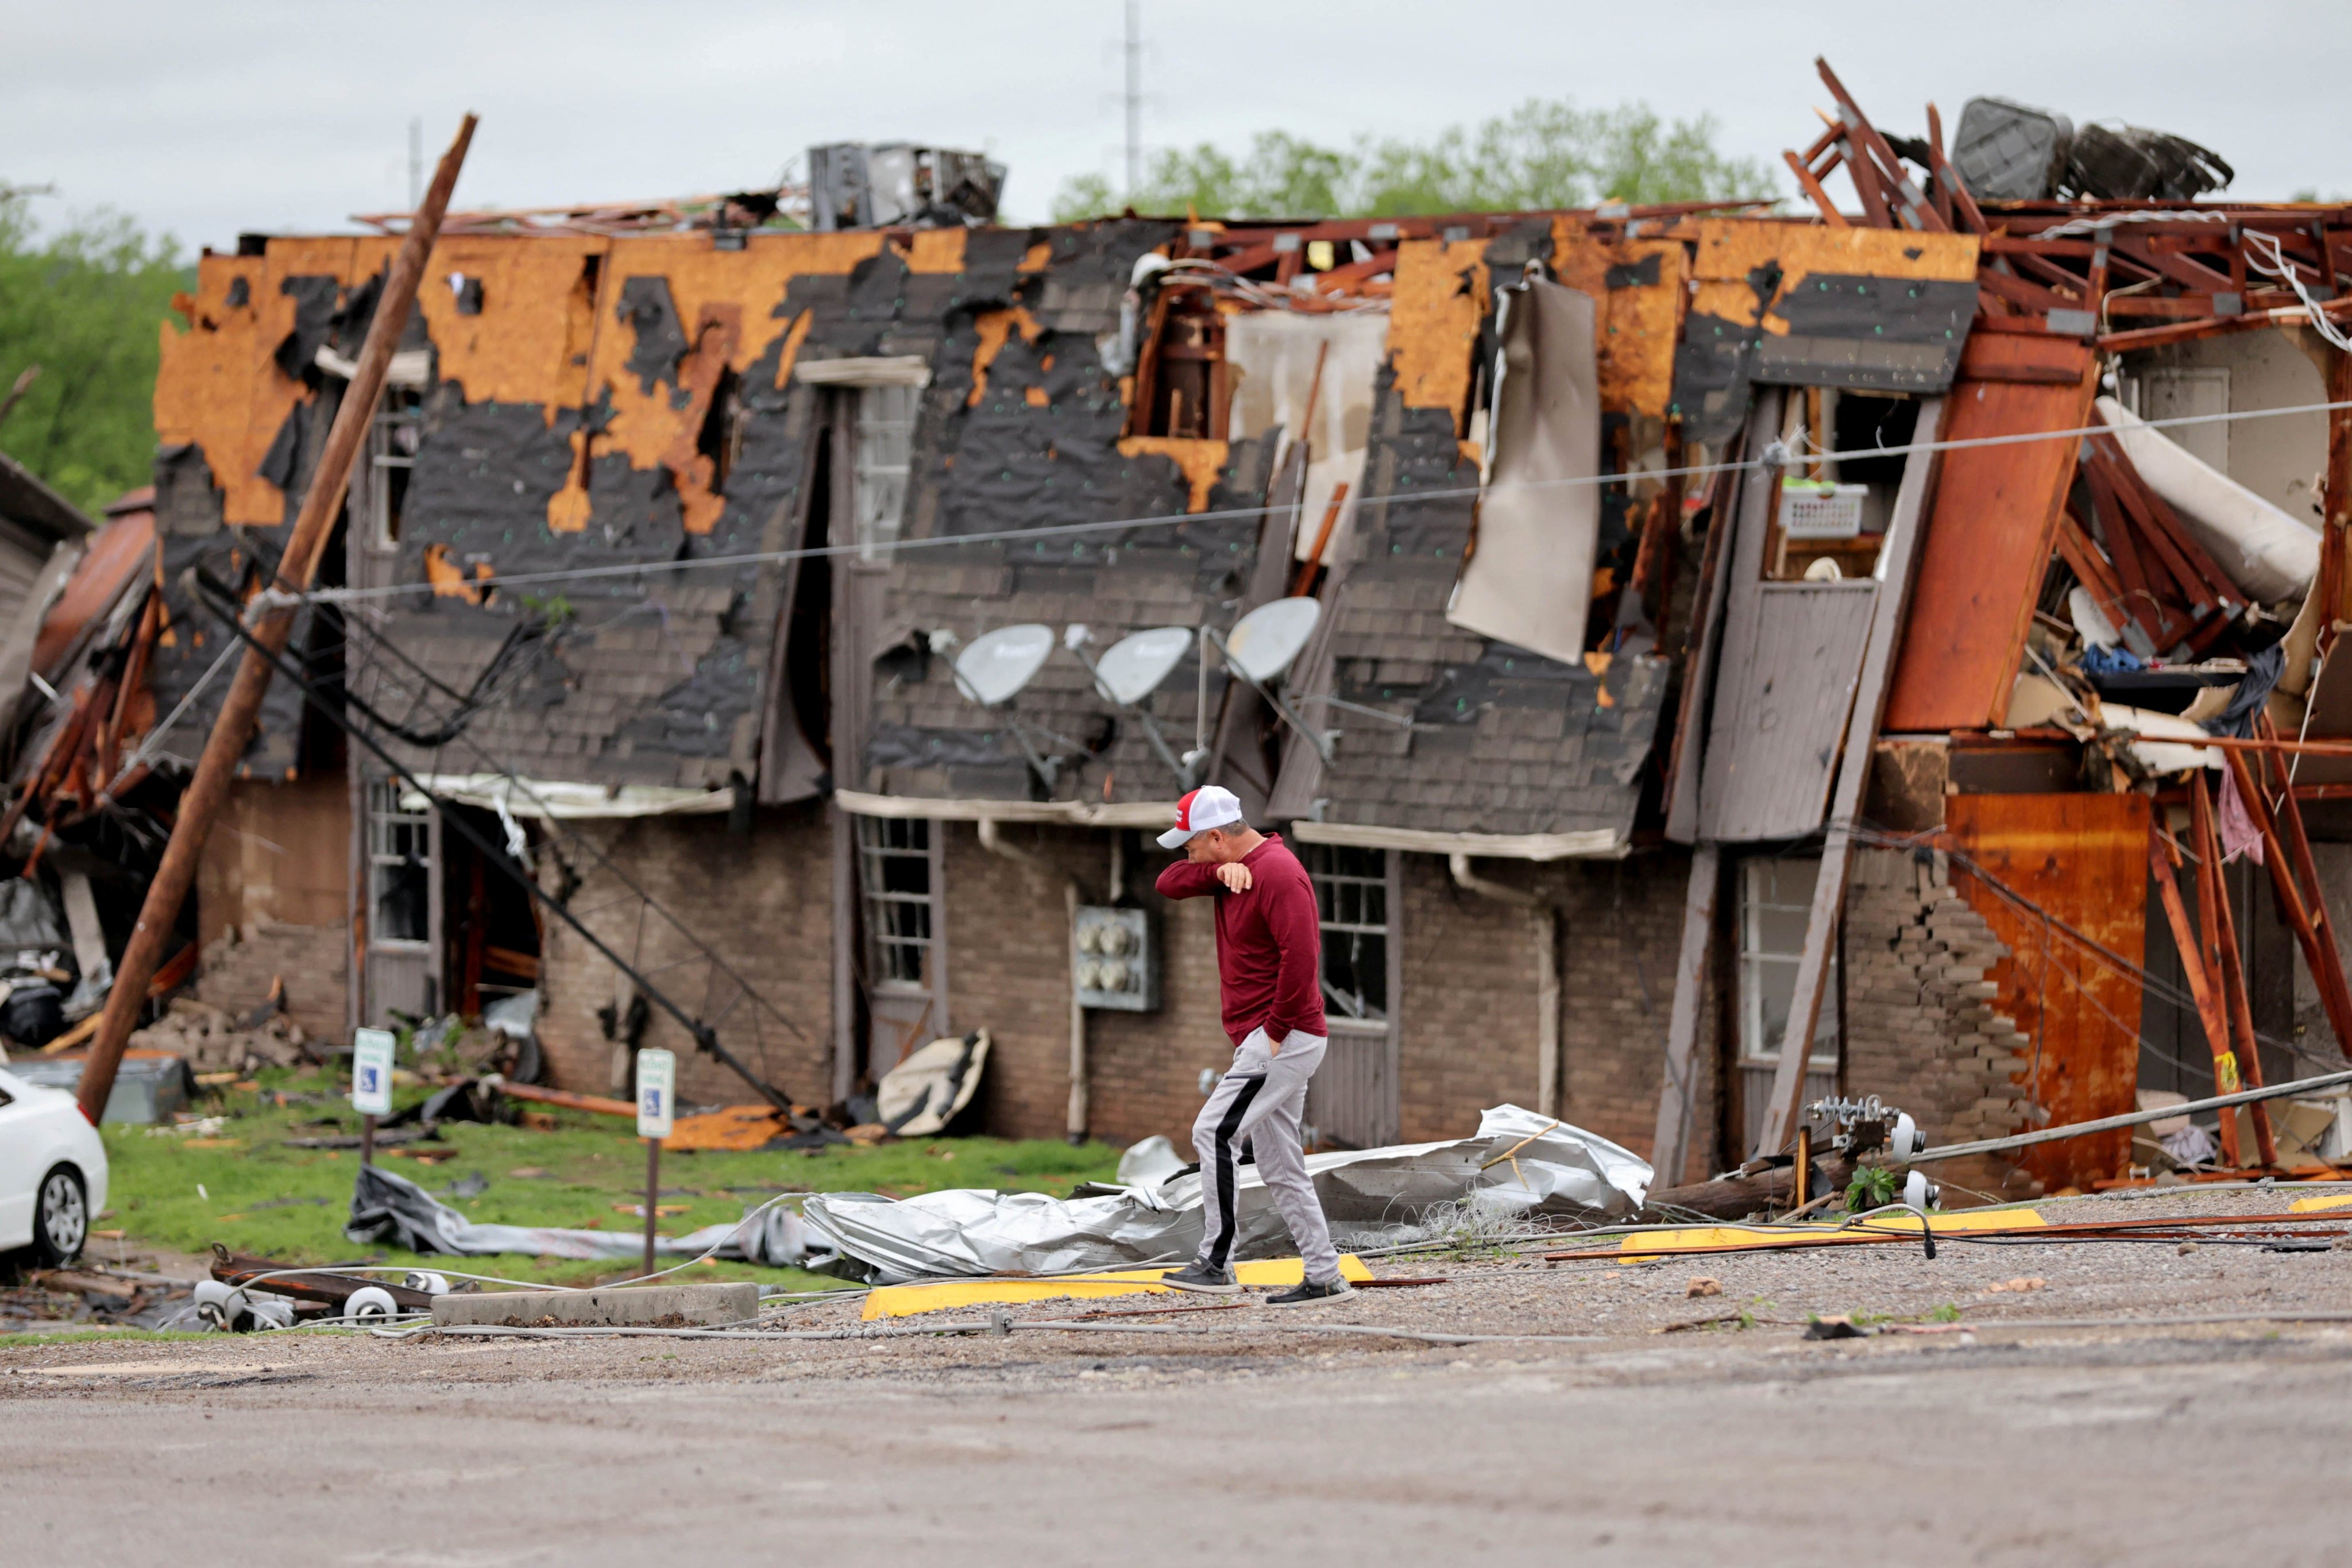 A man walks past a damaged building after it was hit by a tornado the night before in Sulphur, Oklahoma, US on Sunday. Photo: Bryan Terry / The Oklahoman / USA Today Network via Reuters